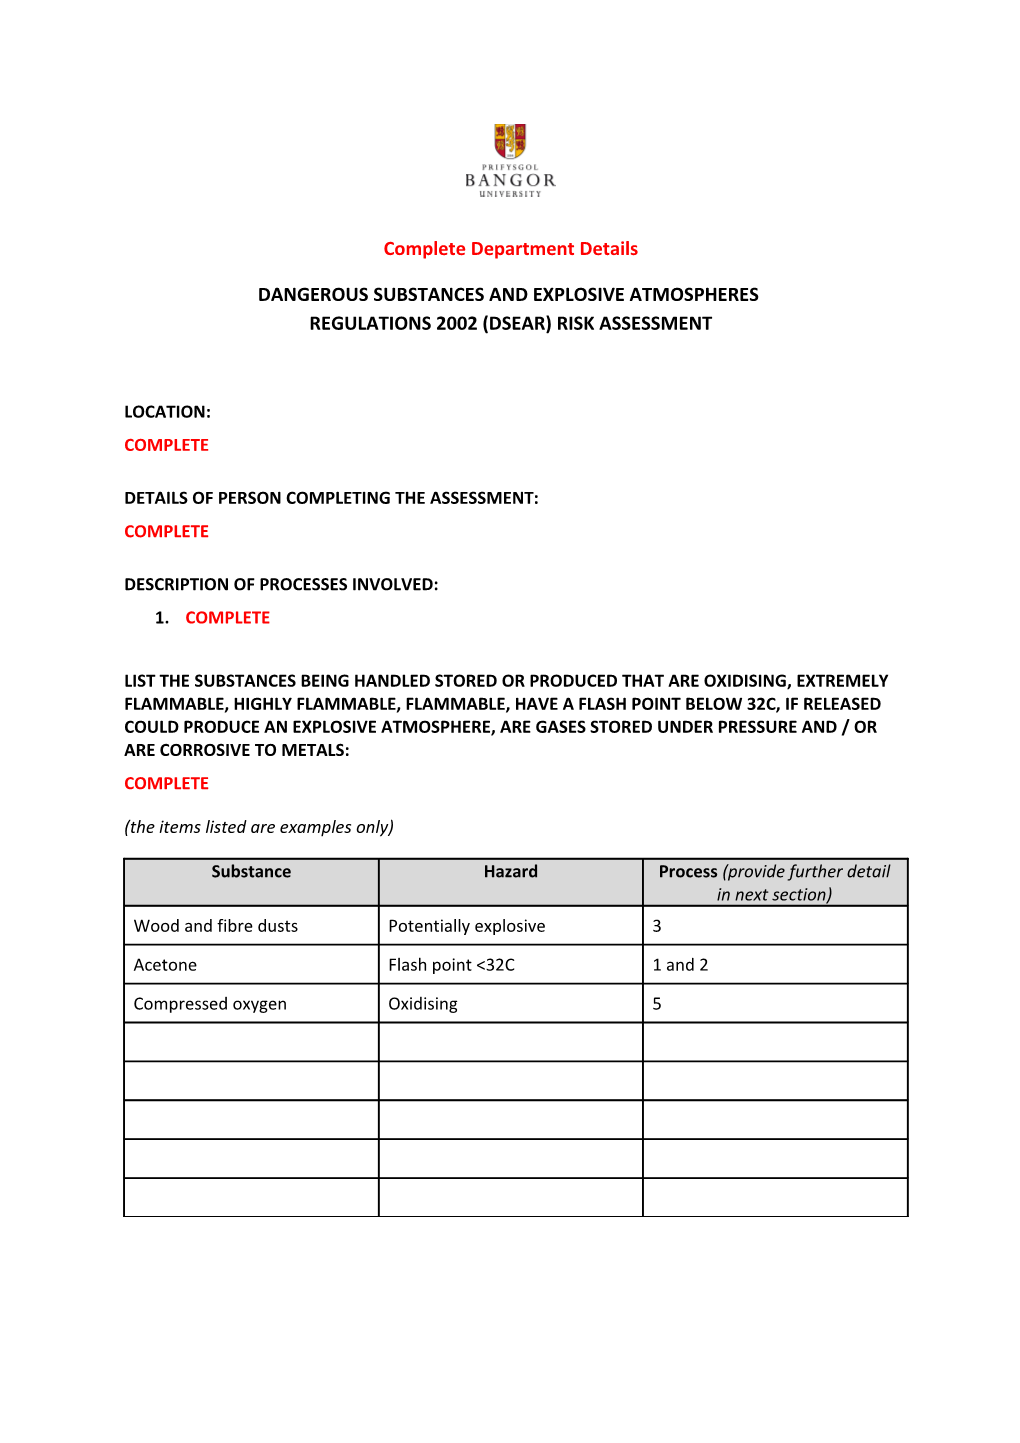 Details of Person Completing the Assessment